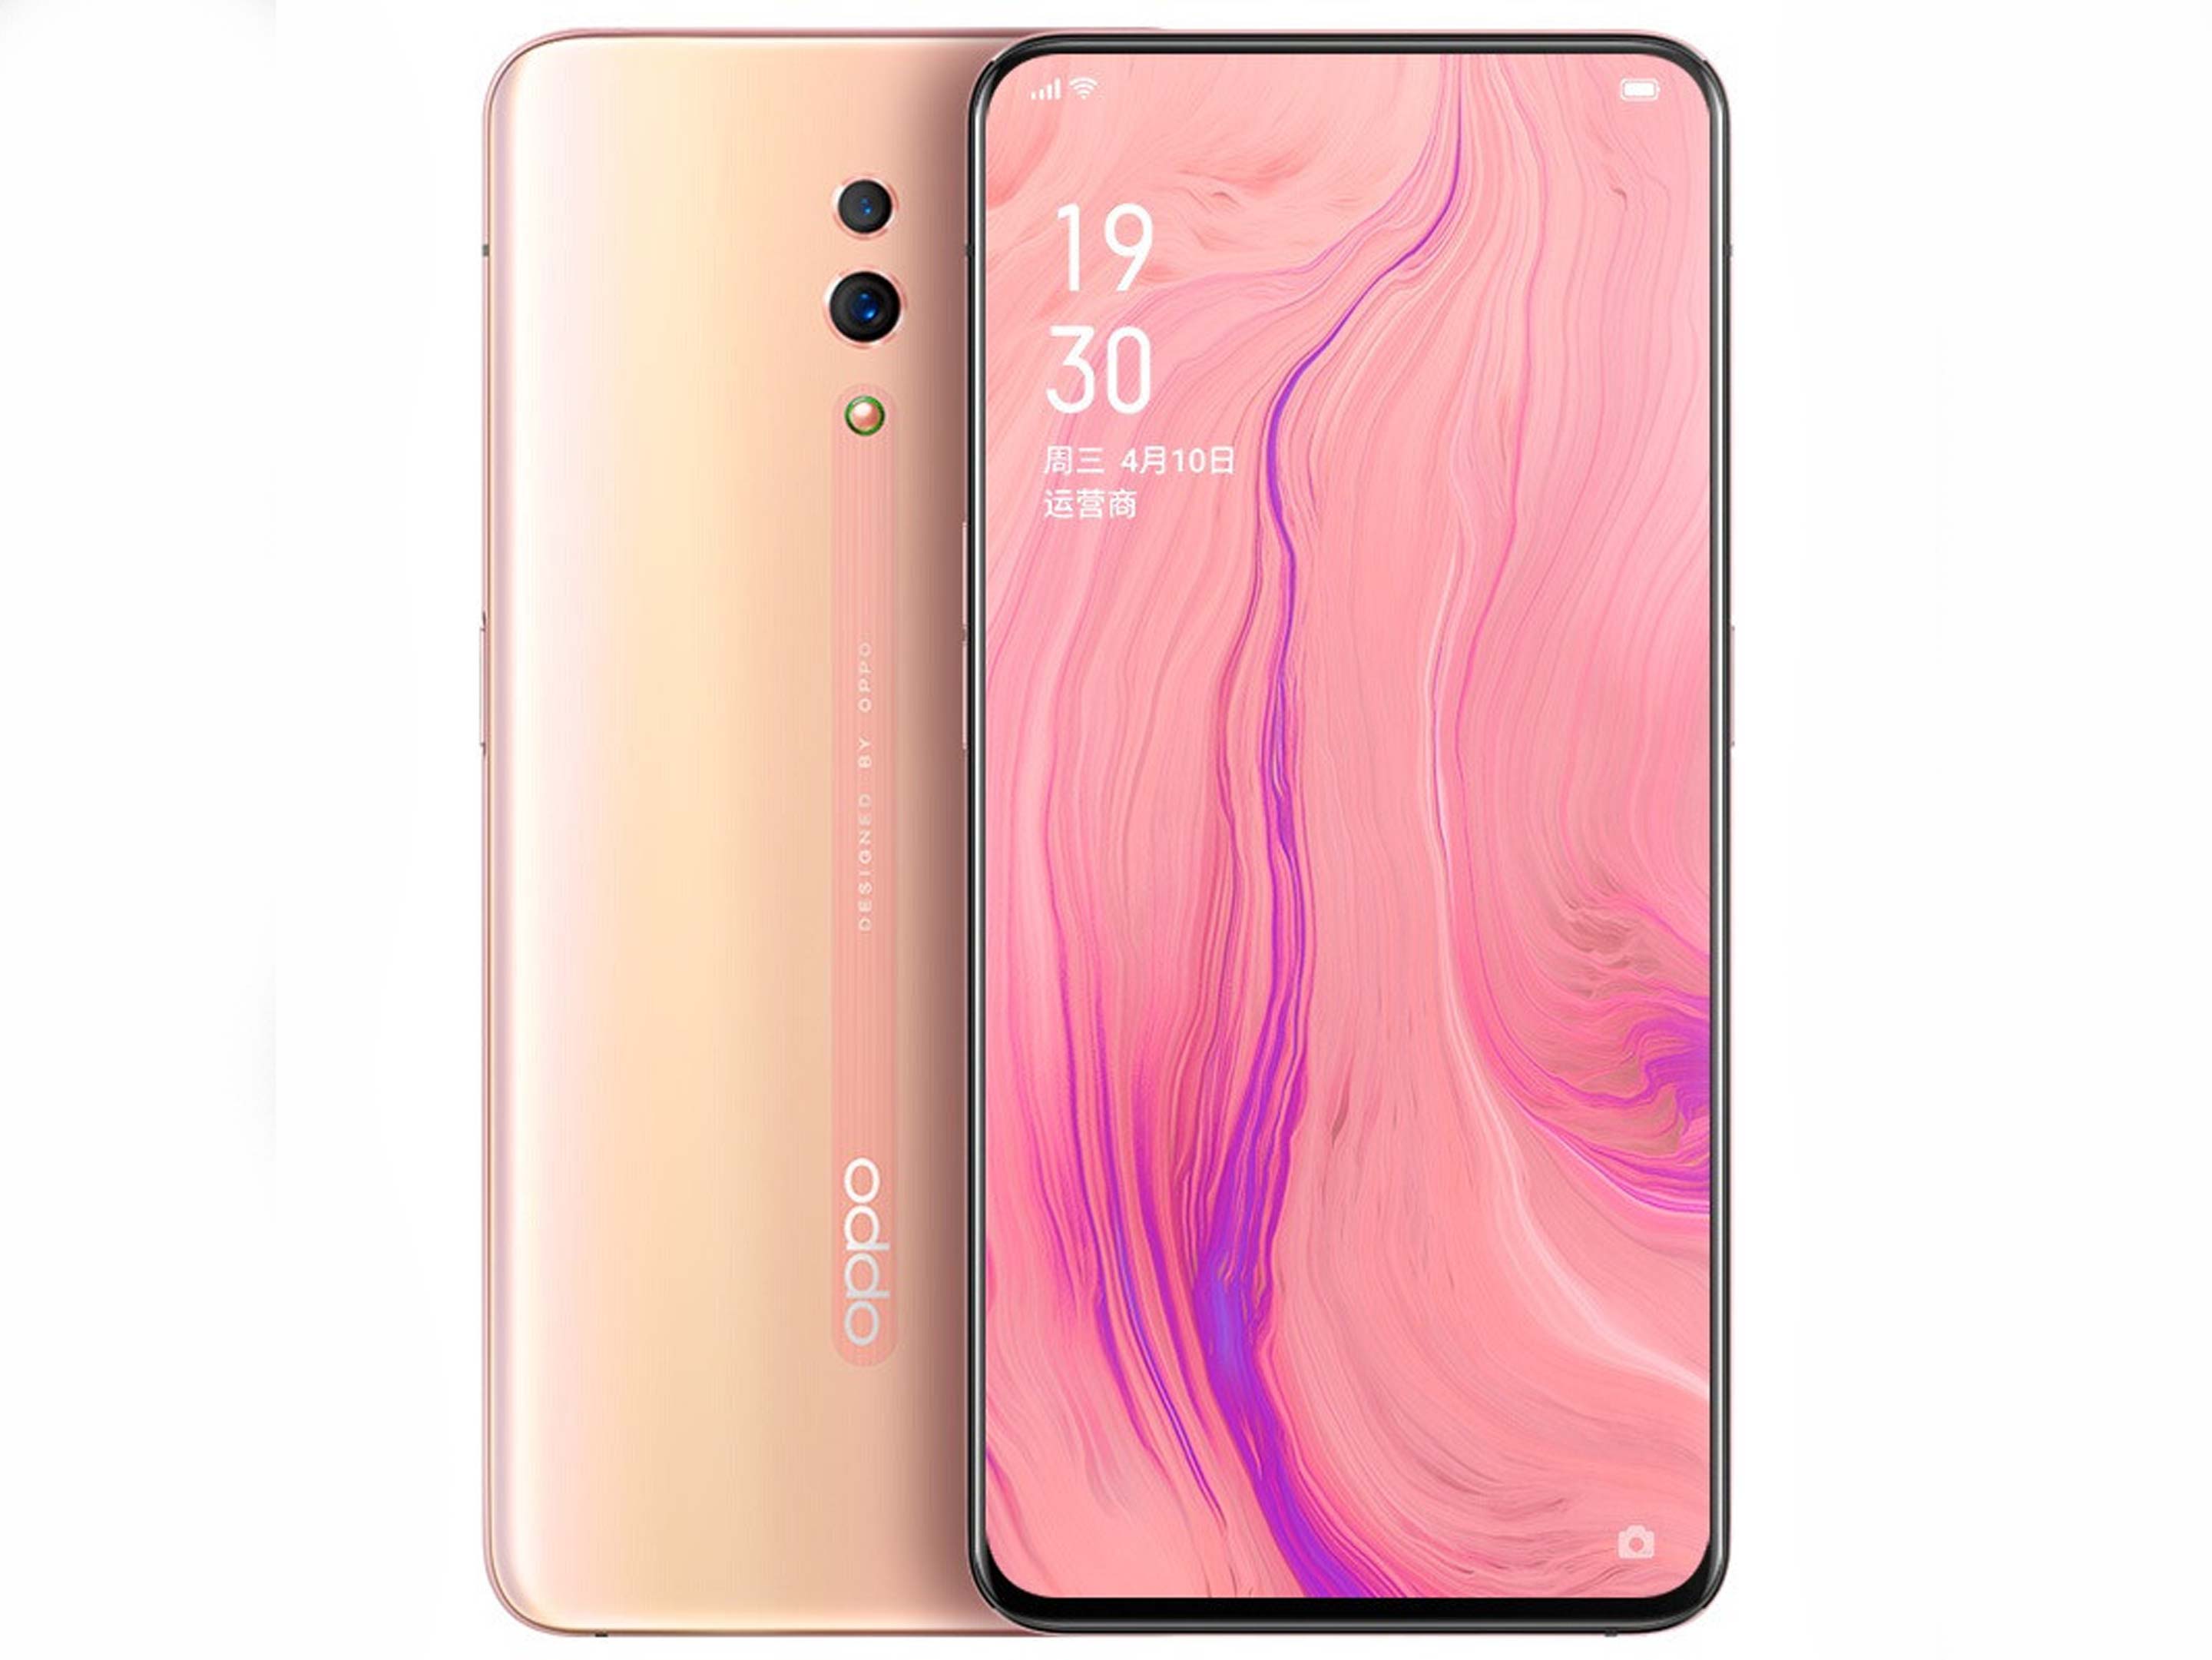 The Oppo Reno in pink